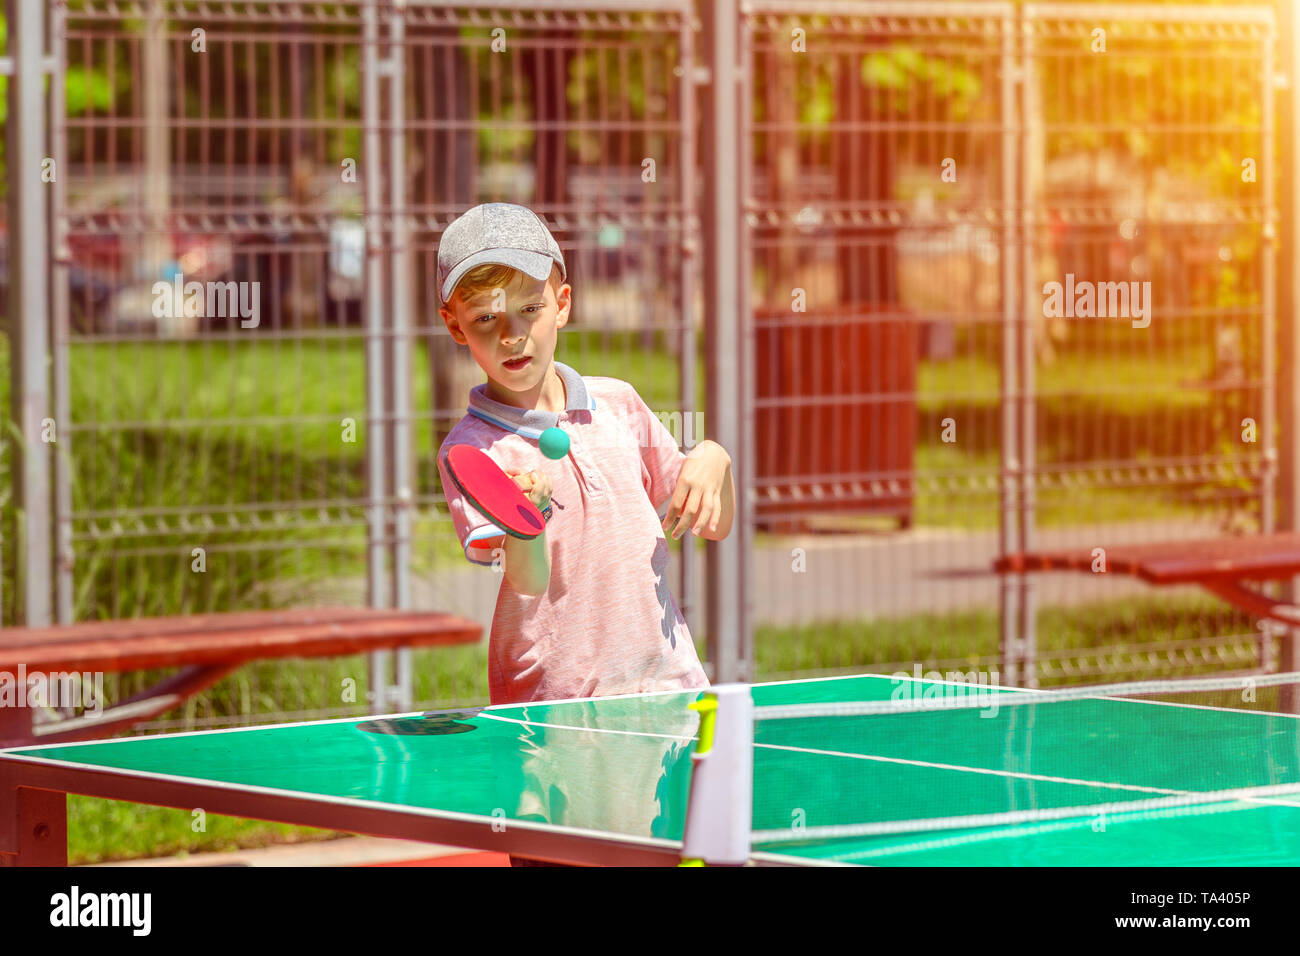 Cute little boy playing table tennis in park – outdoor activity in sport ground with smiling kid having fun learning and practicing ping pong Stock Photo